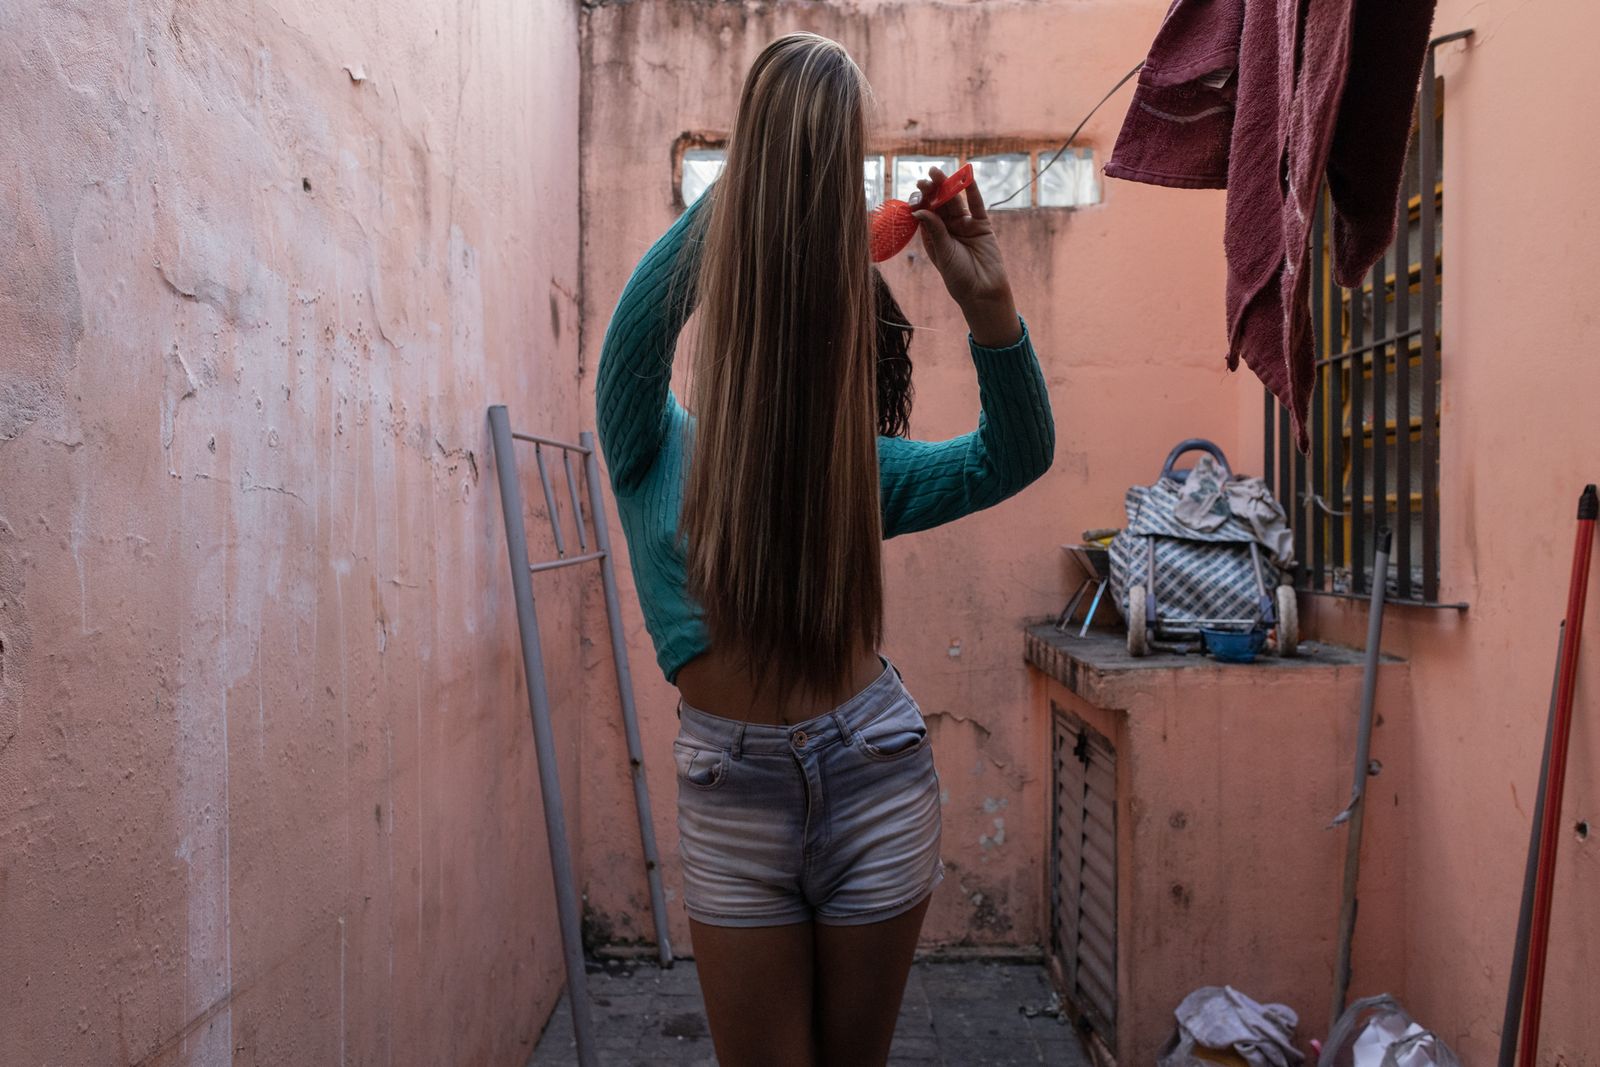 © Dan Agostini - Celina combs a wig in the house where she lives in São Paulo.